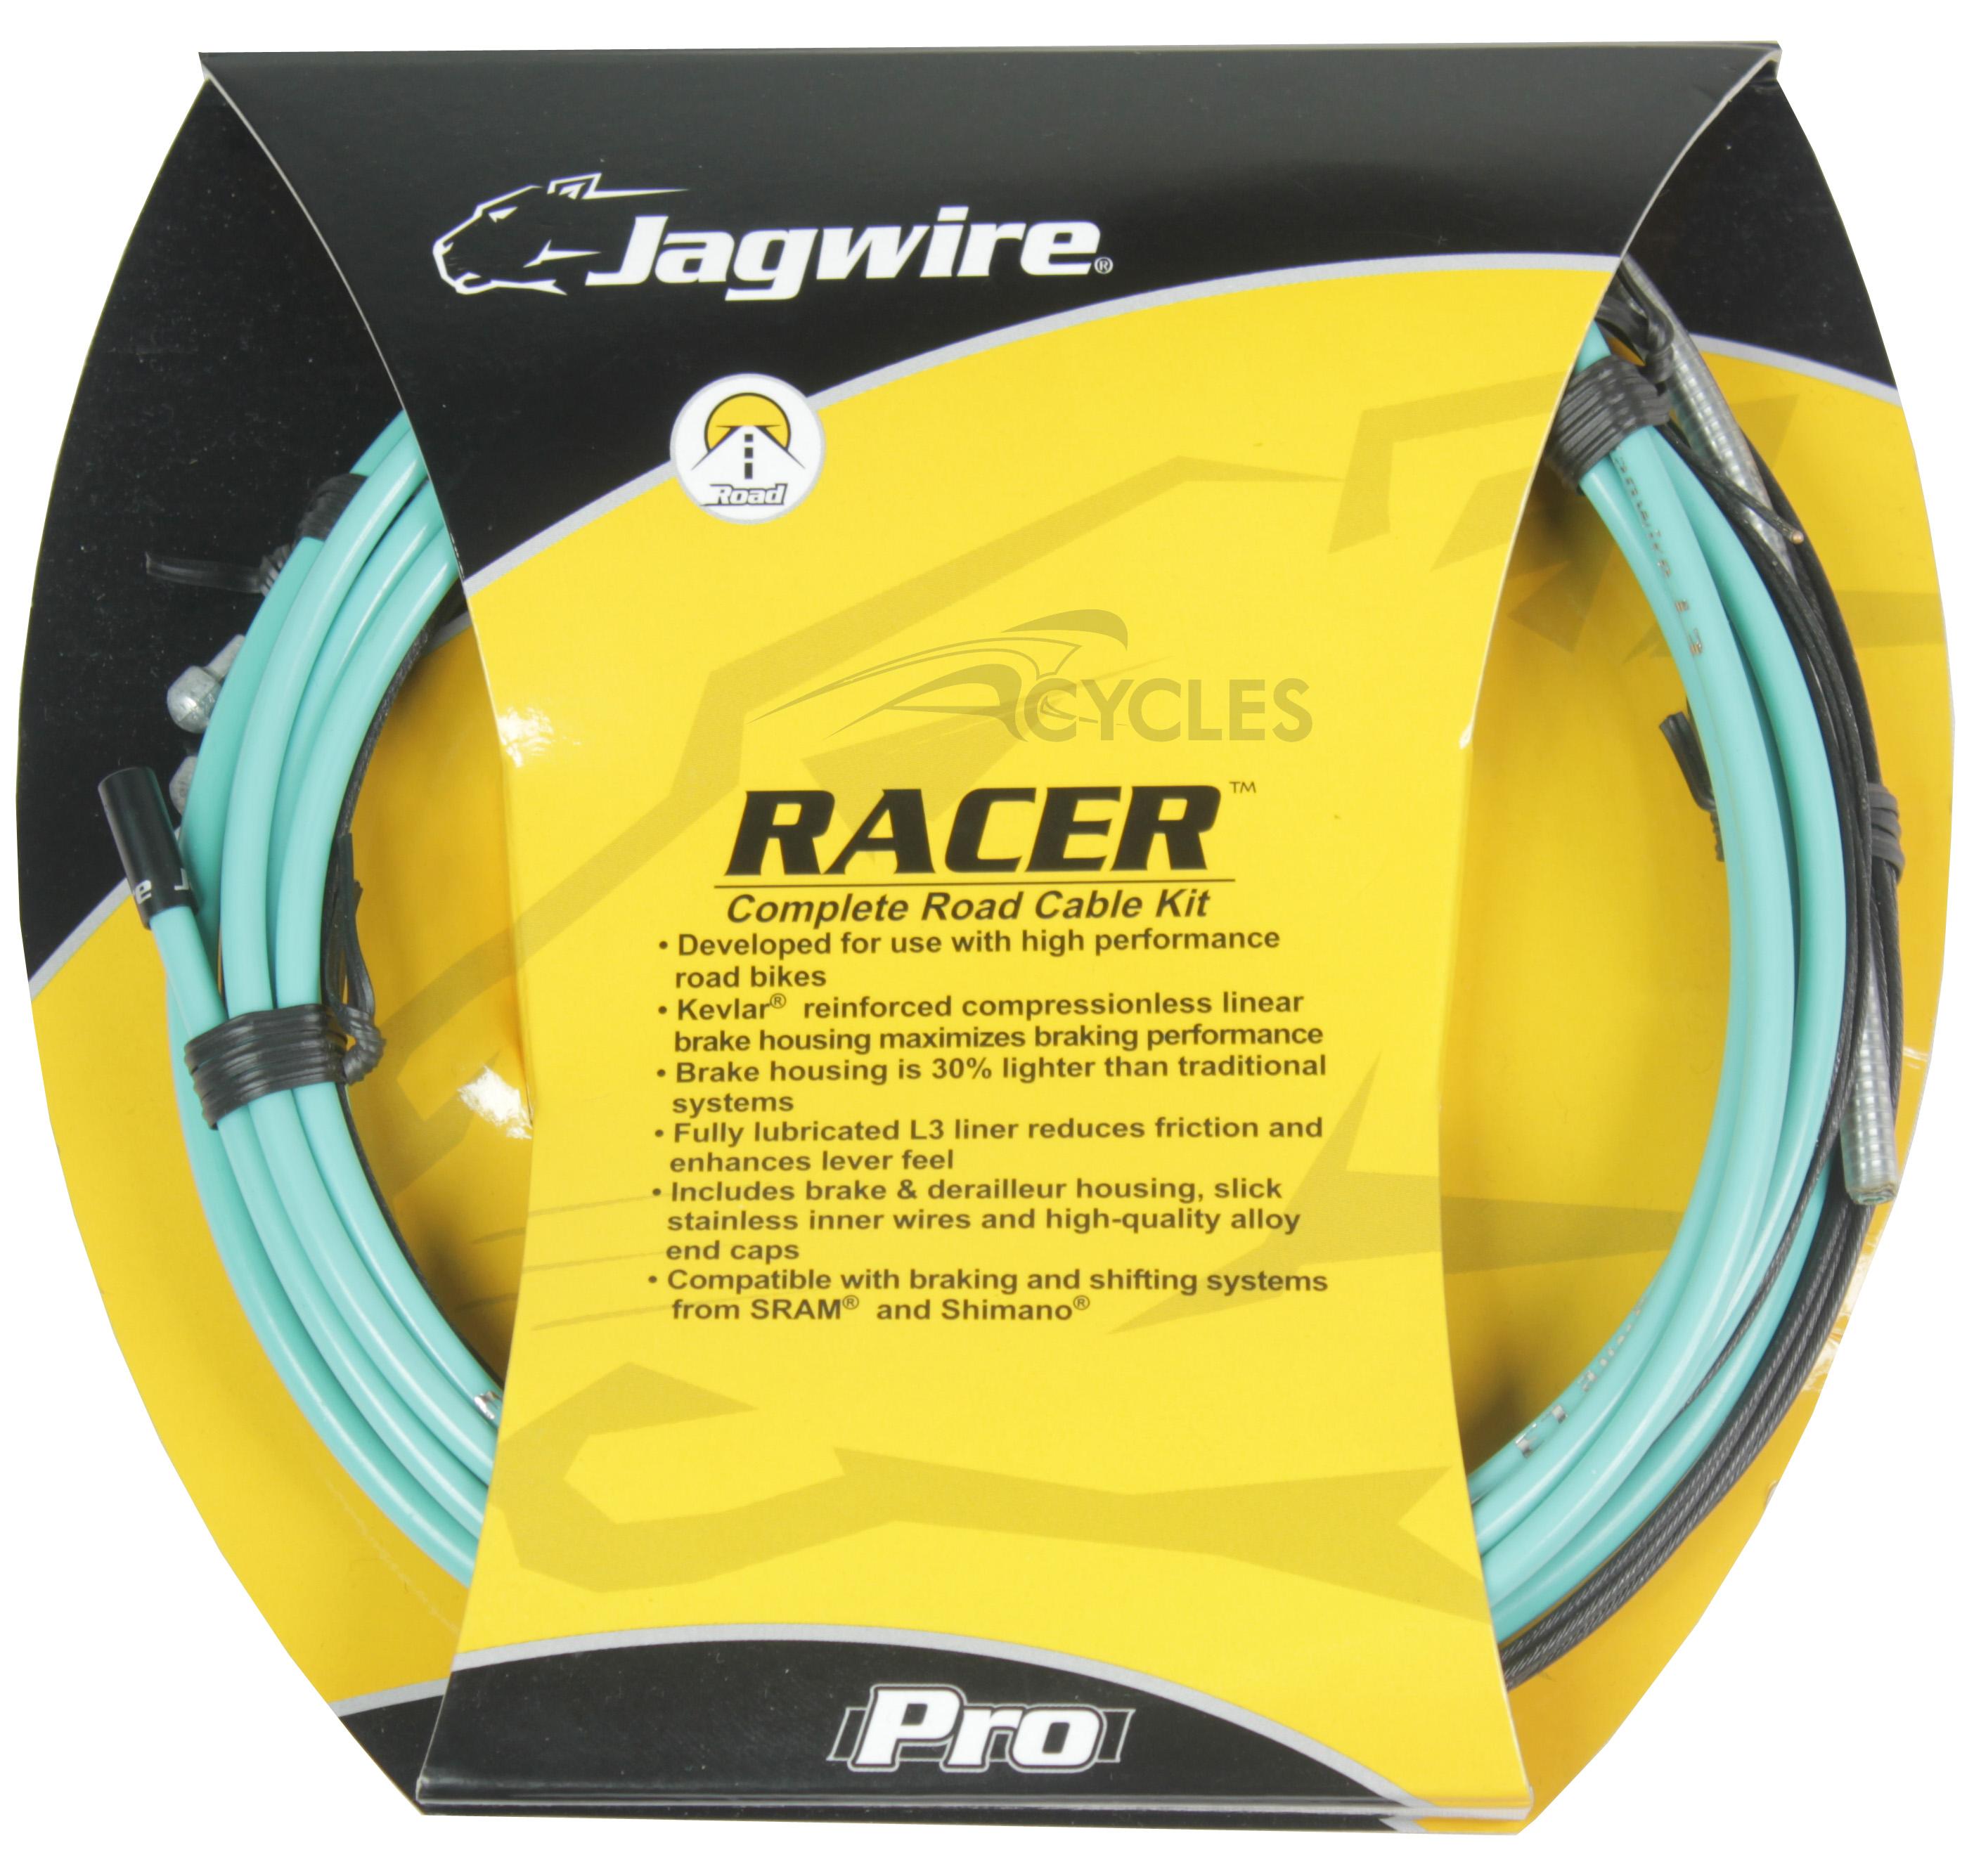 Foto Kit Jagwire Racer Completo Cables Funda Frenos y Cambio Verde Bianchi foto 798245